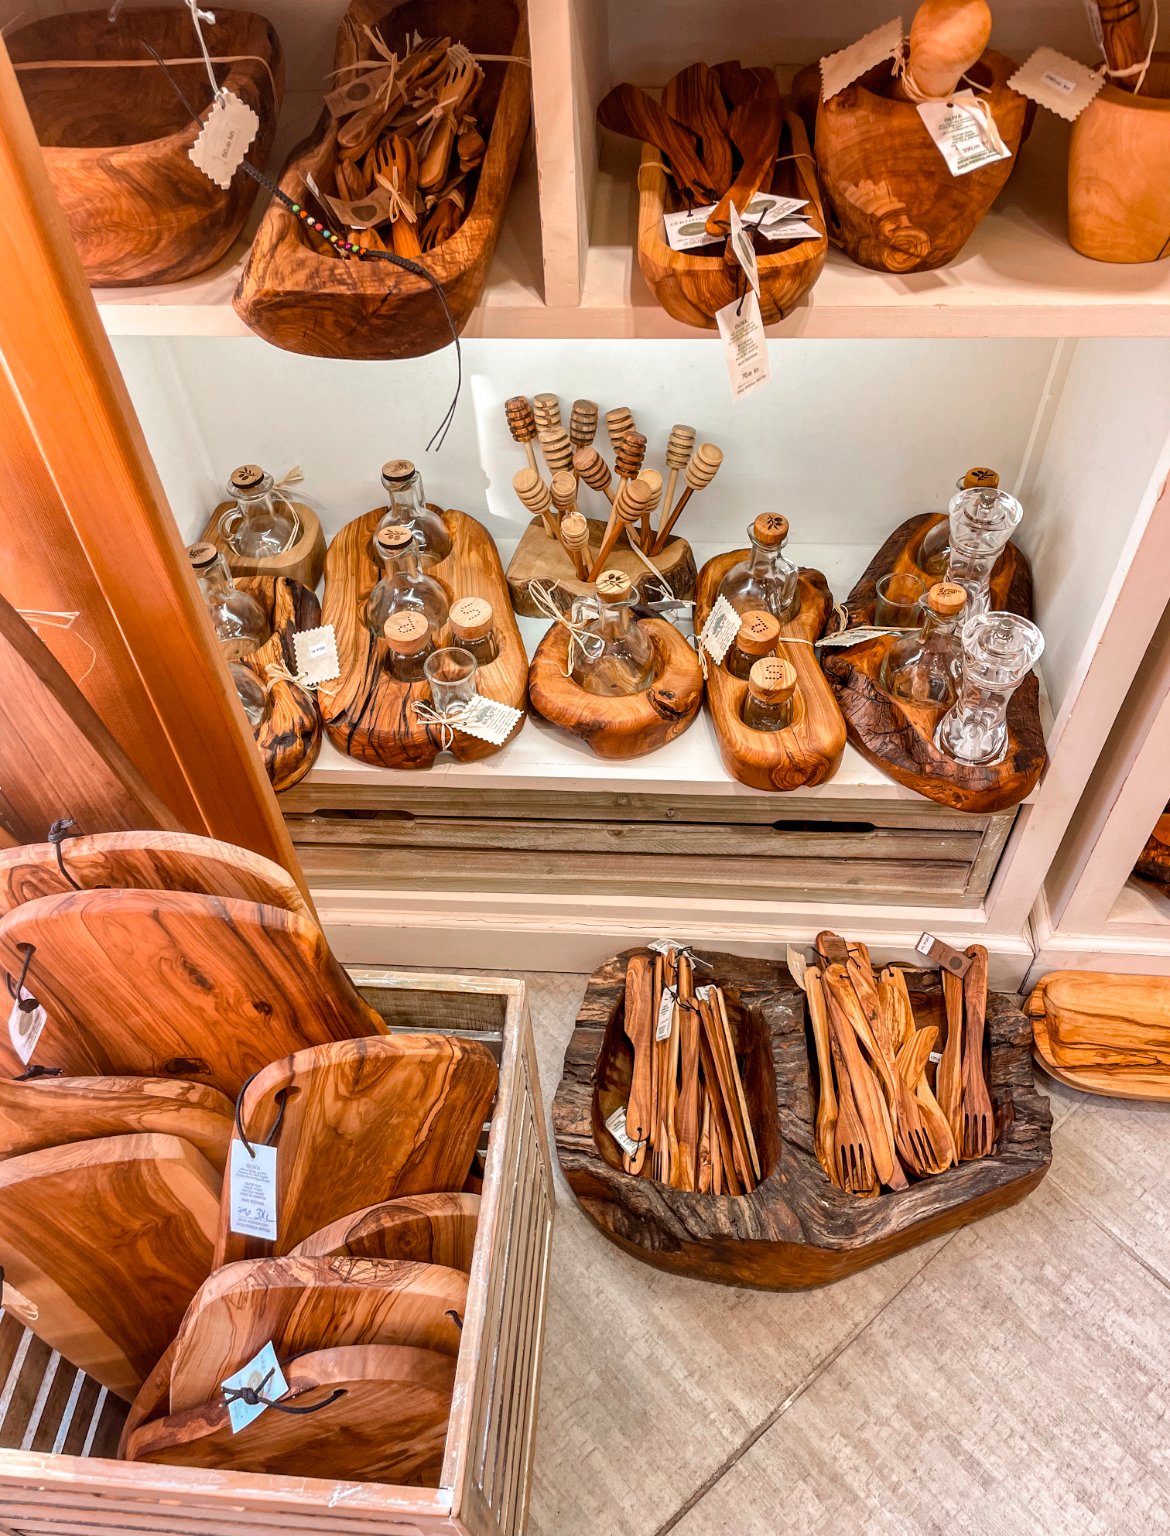 olive wood shop, travel in the balkans